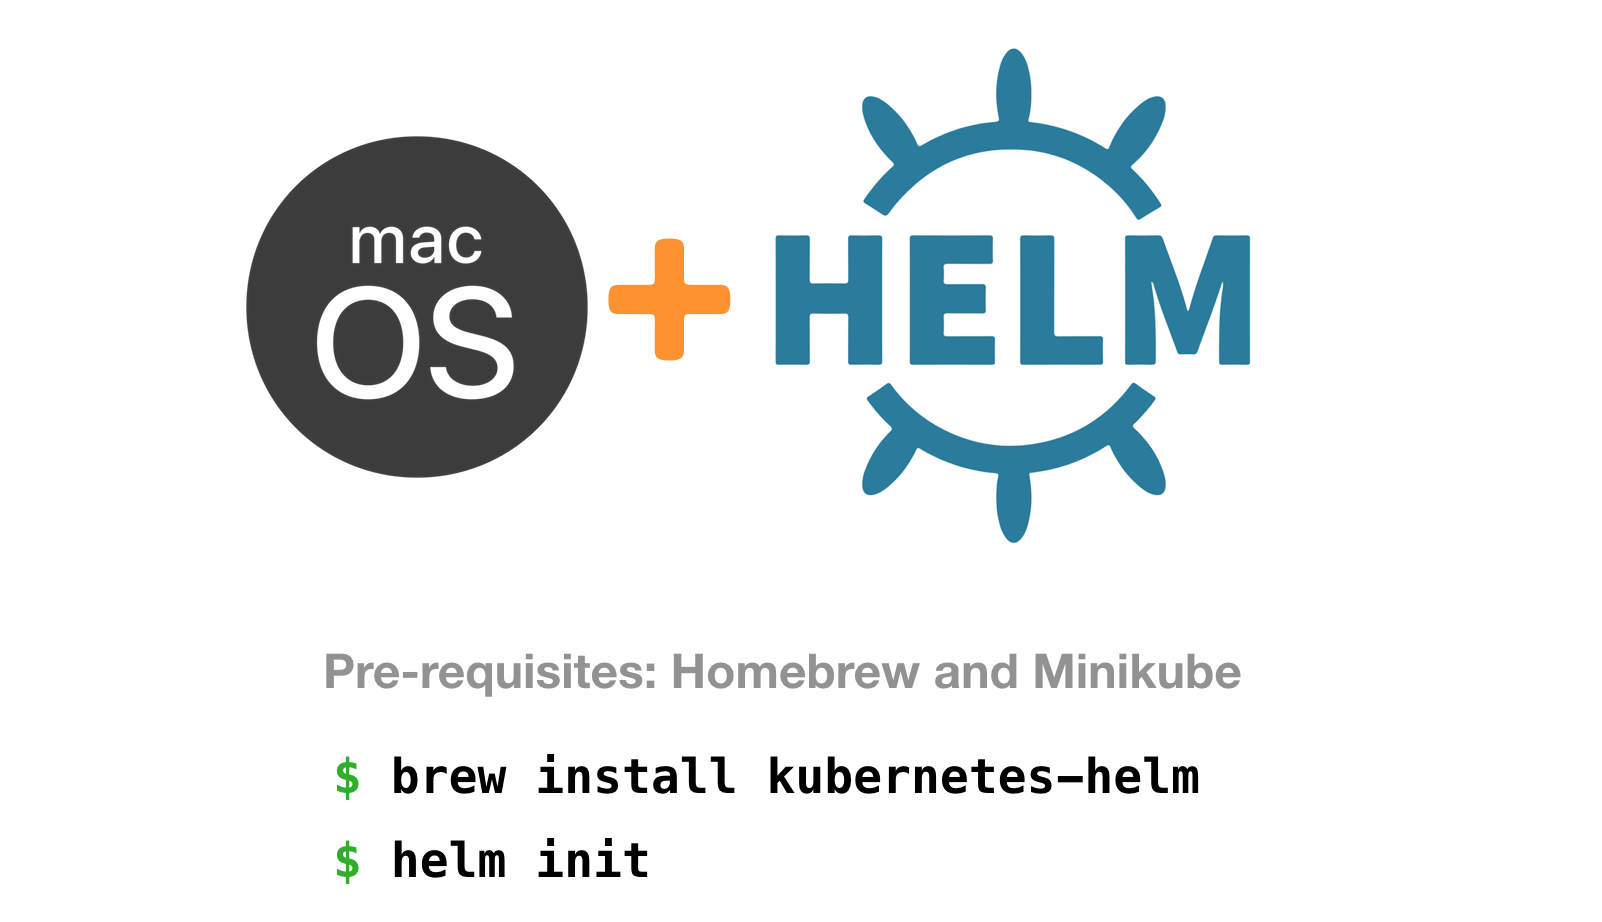 Tutorial for Helm on Mac